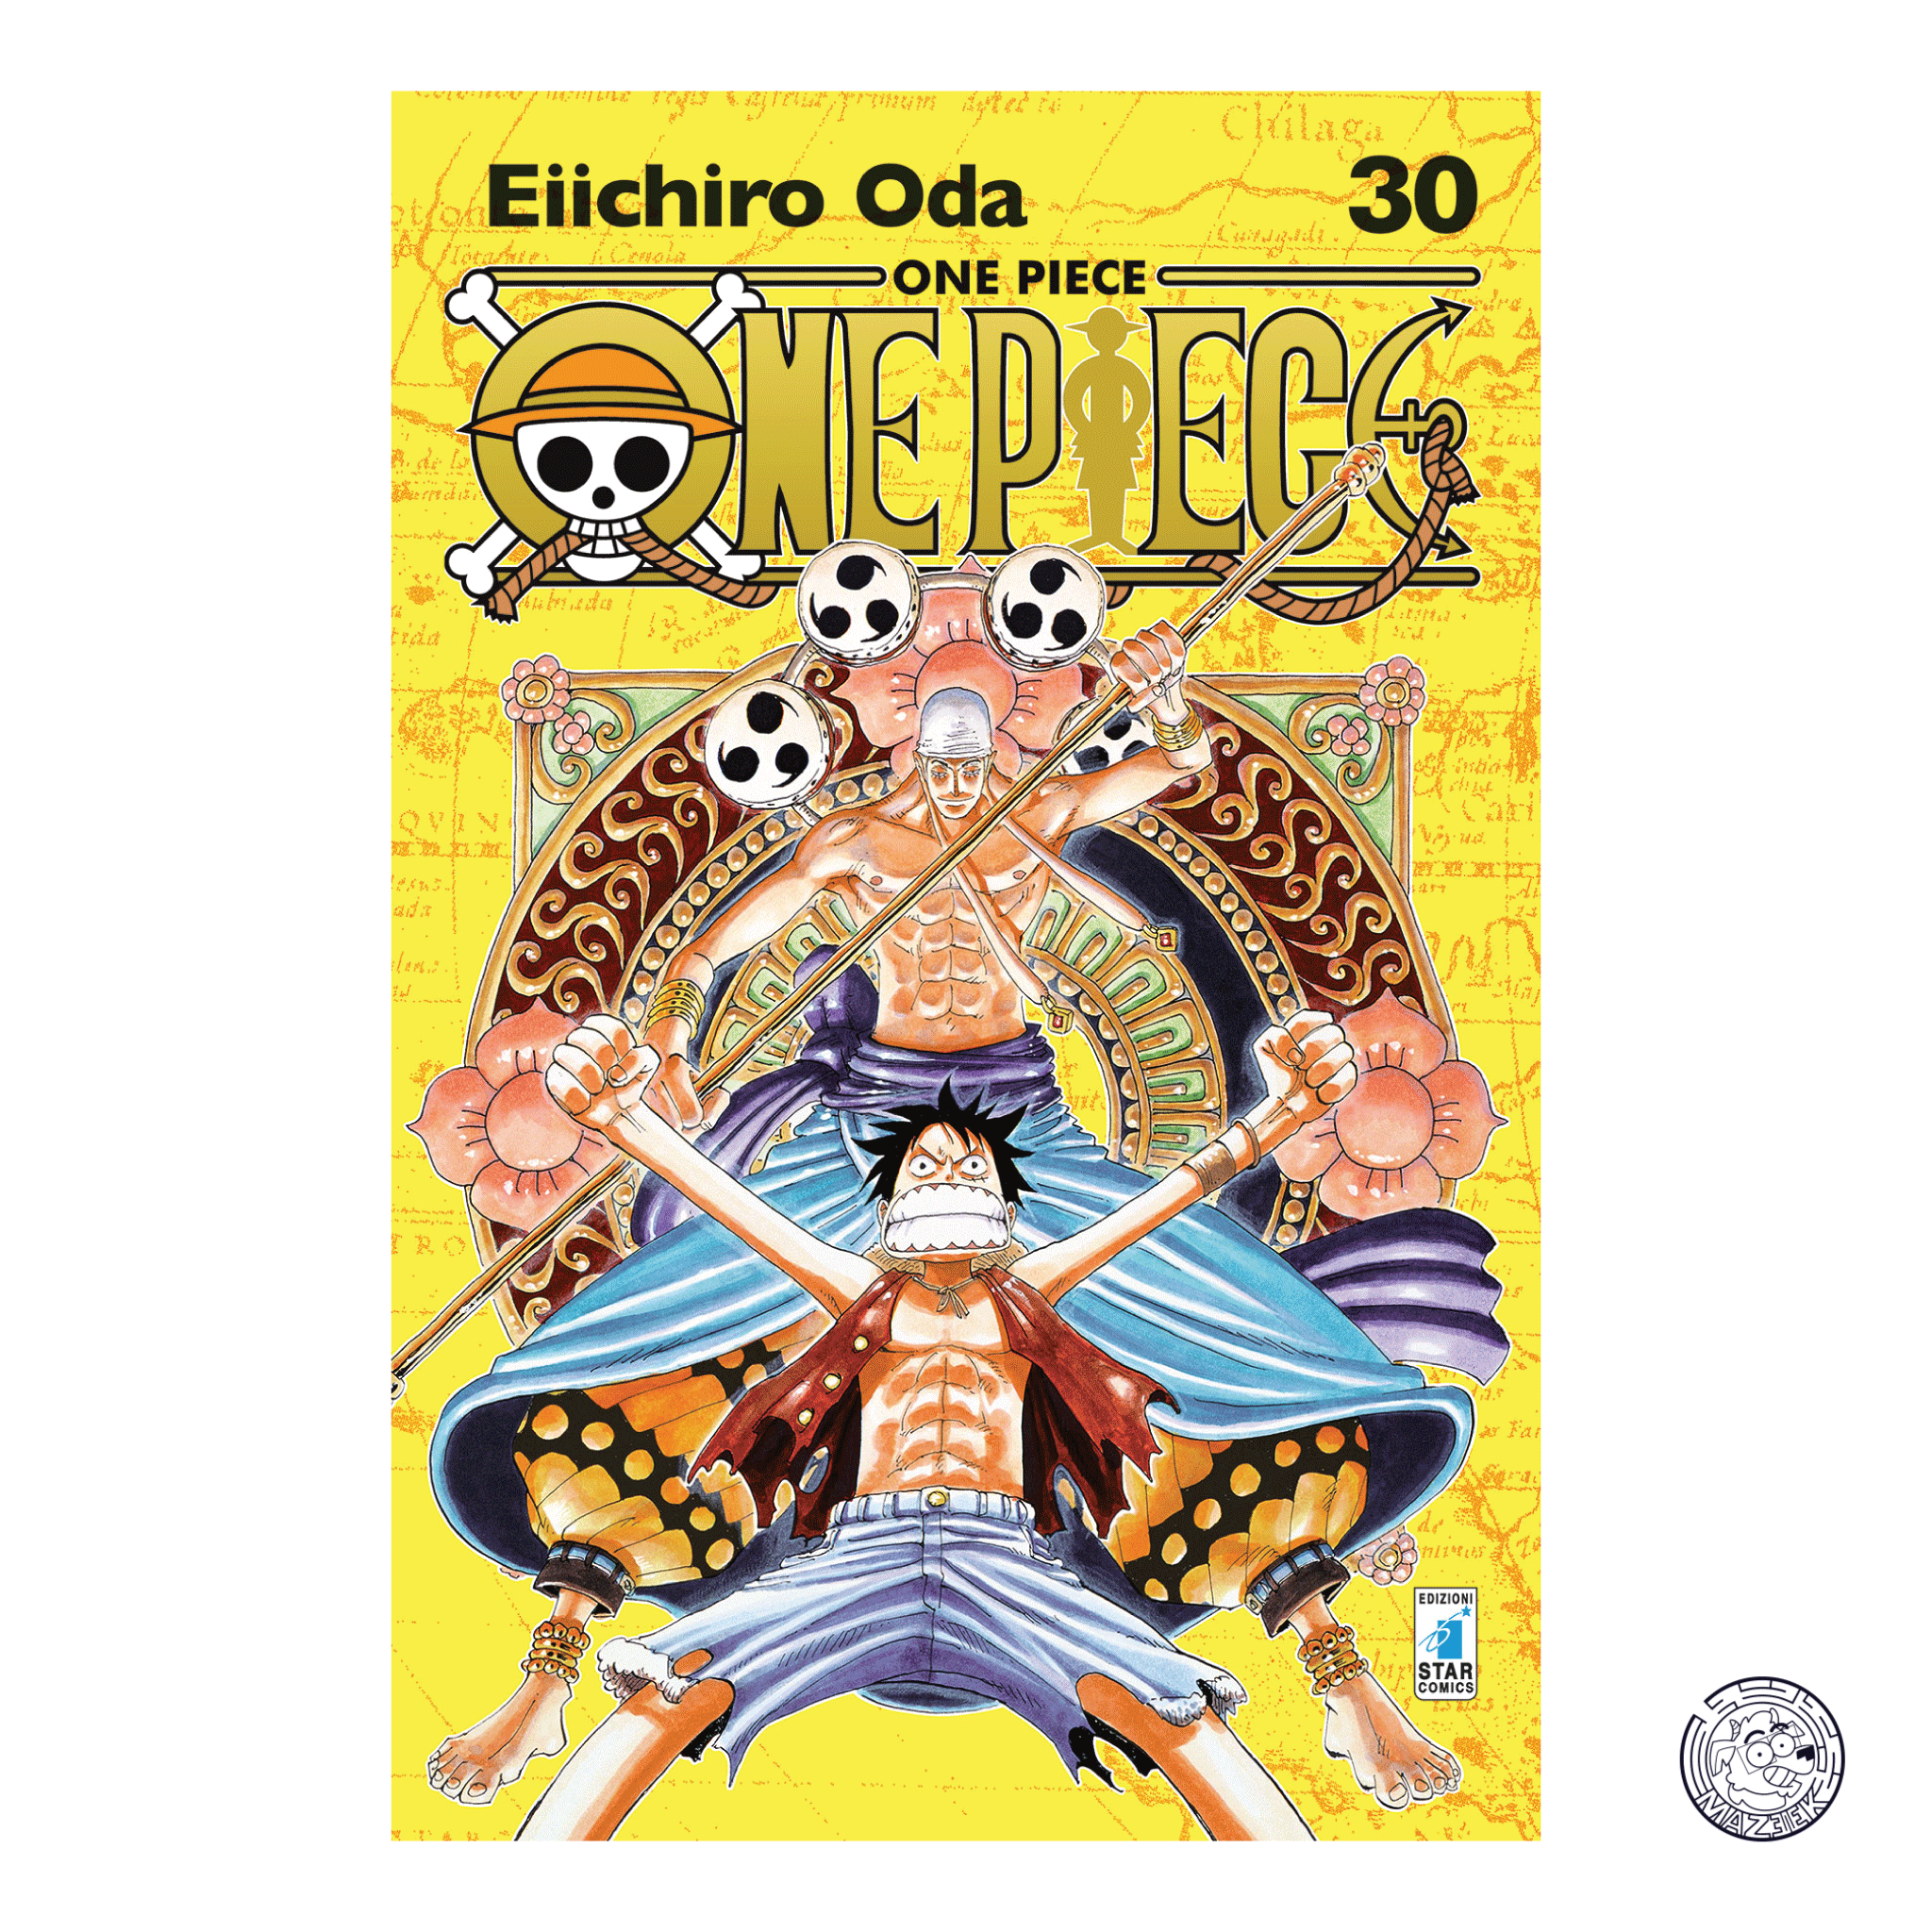 One Piece New Edition 30